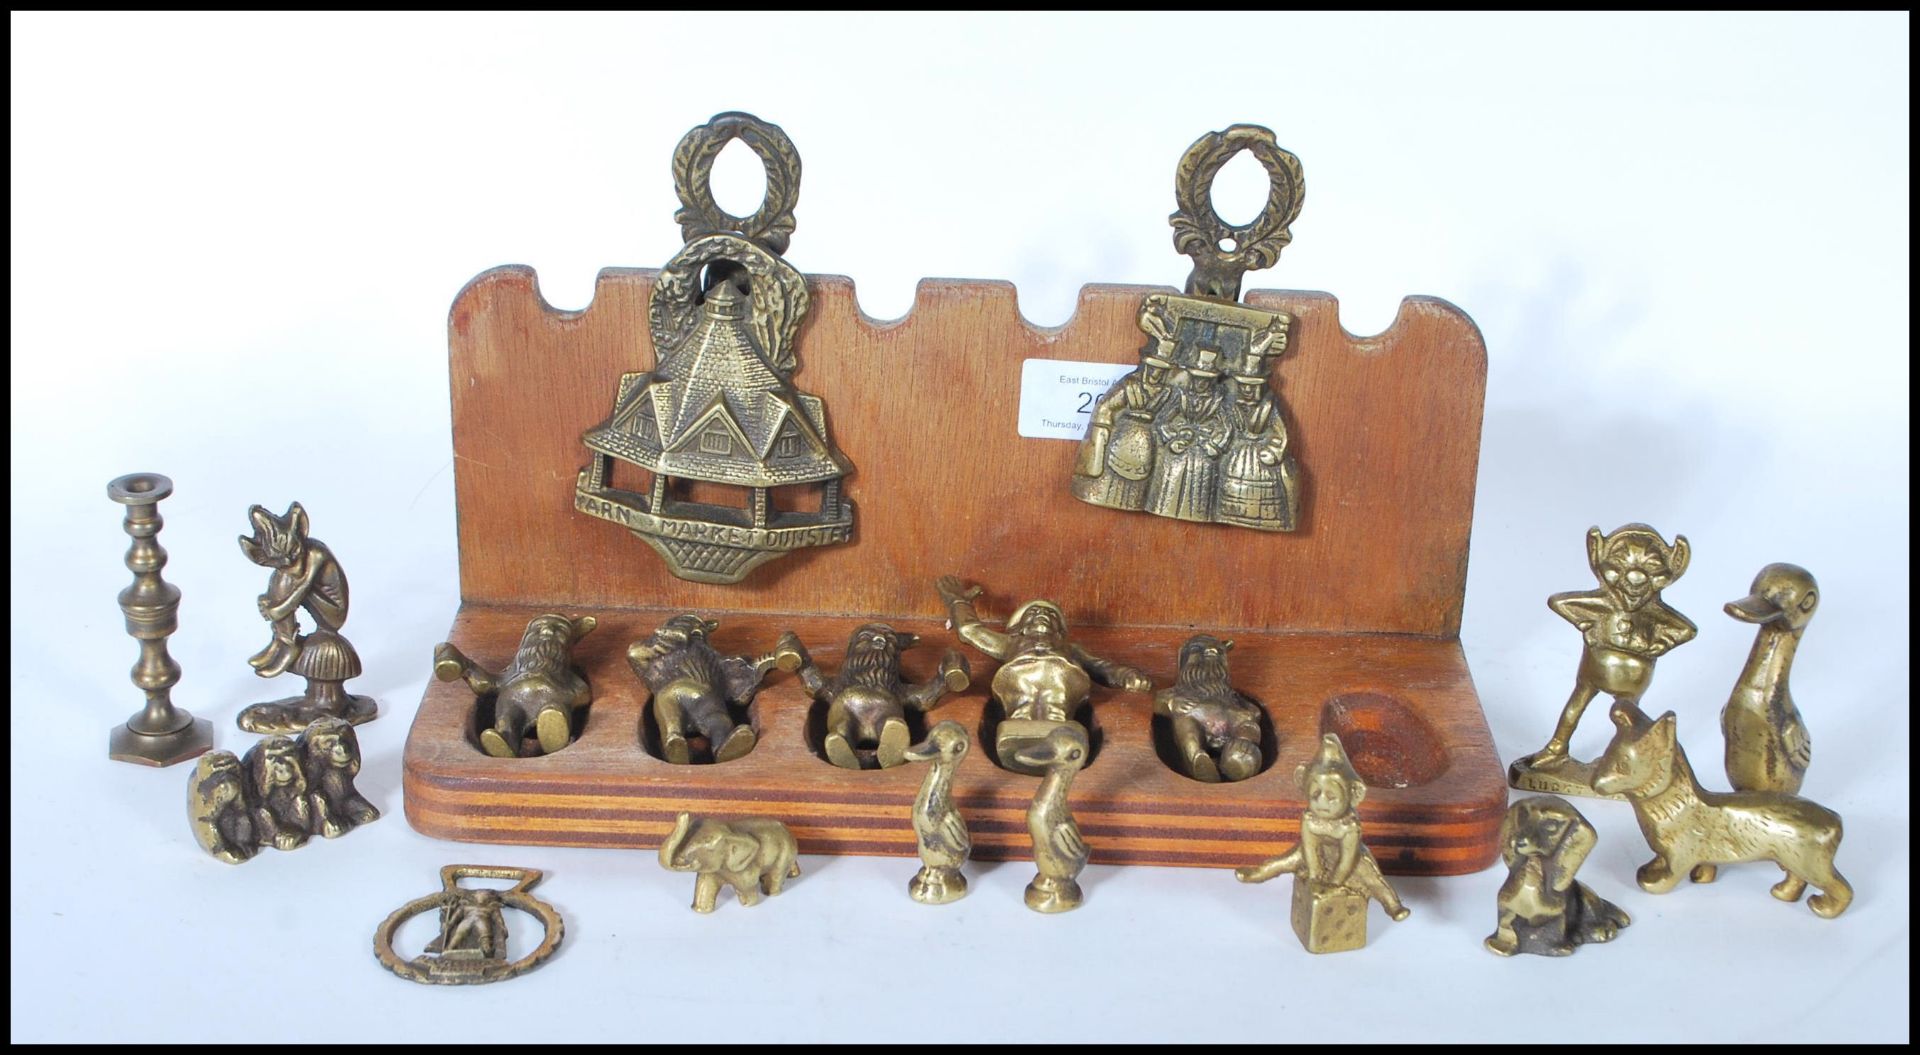 A collection of unusual brass ornamental figures to include mythical creatures, goblins, pixies